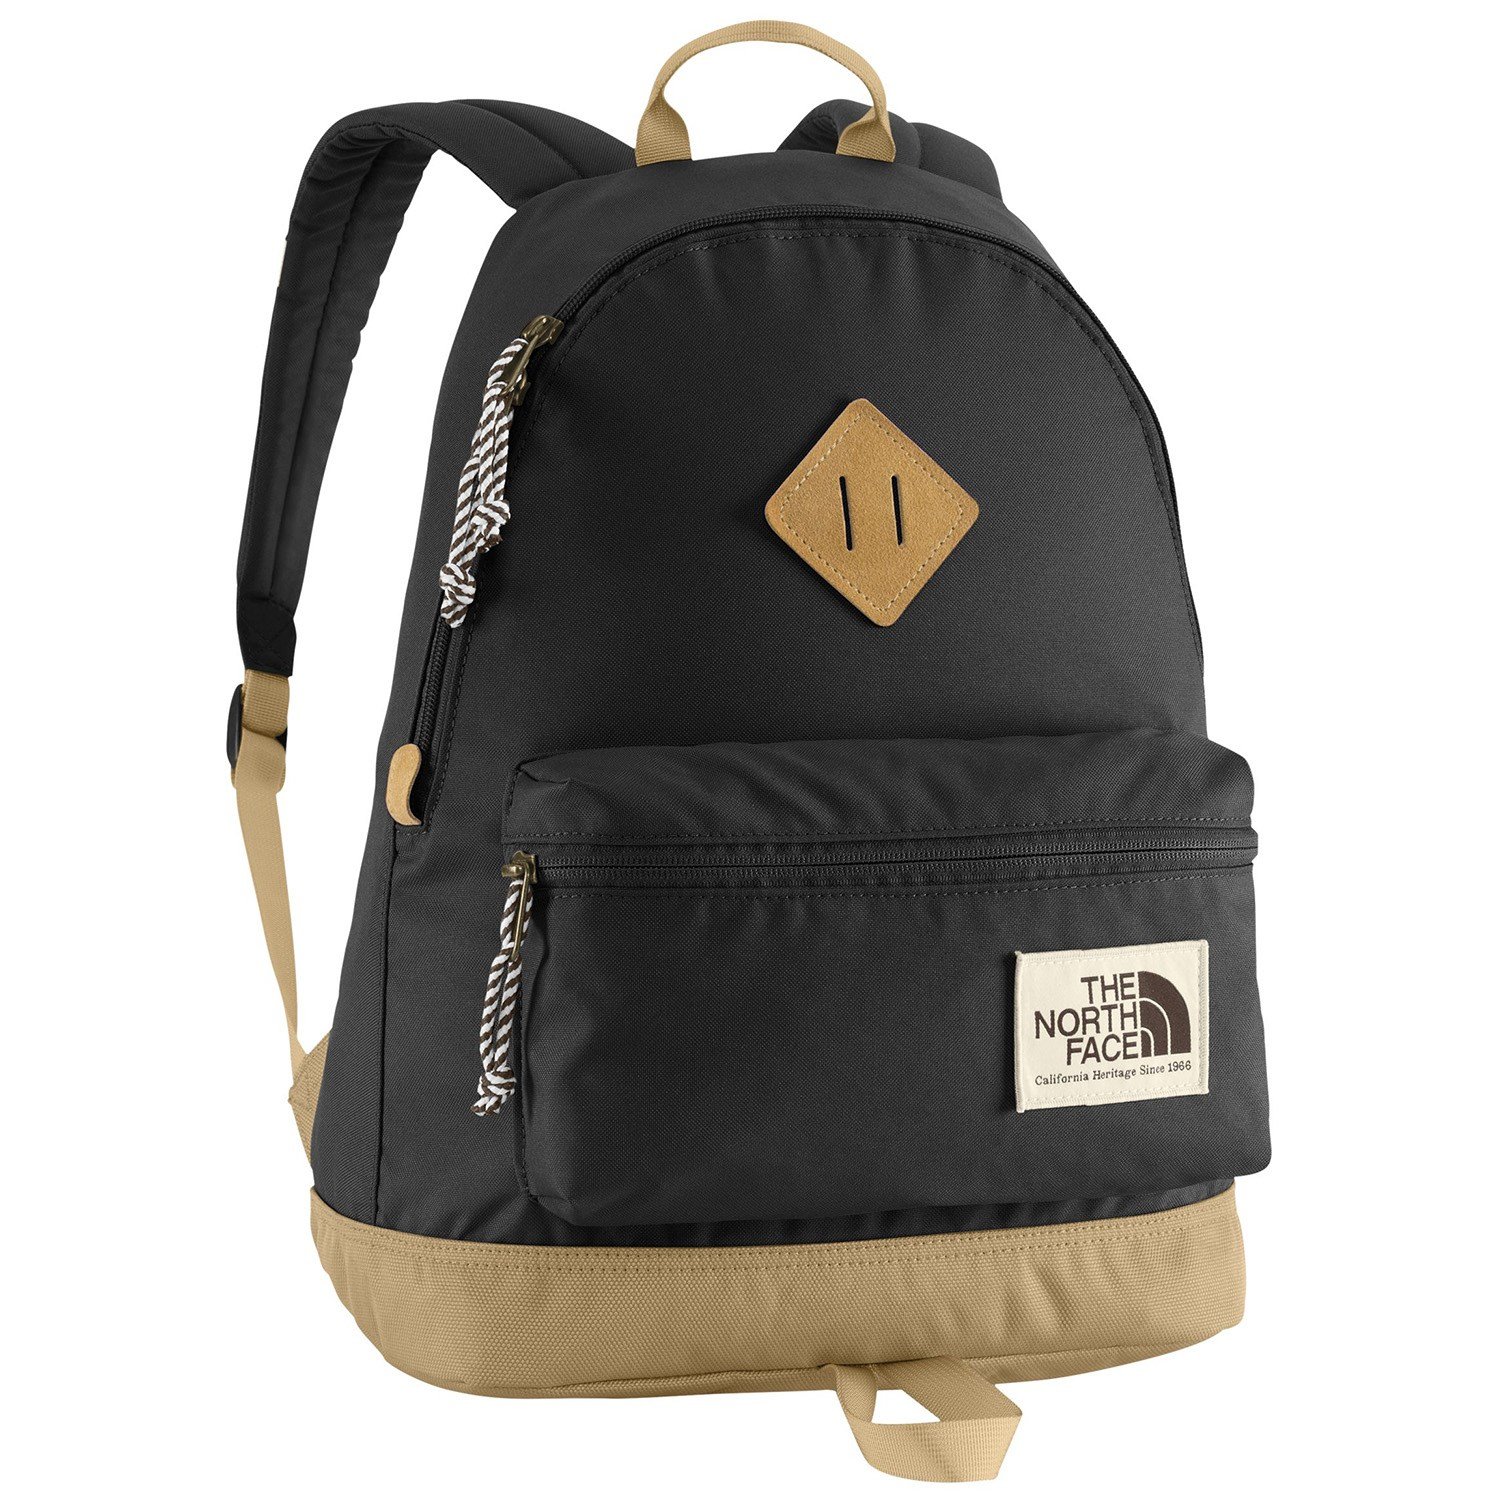 The North Face Mini Berkeley Backpack 